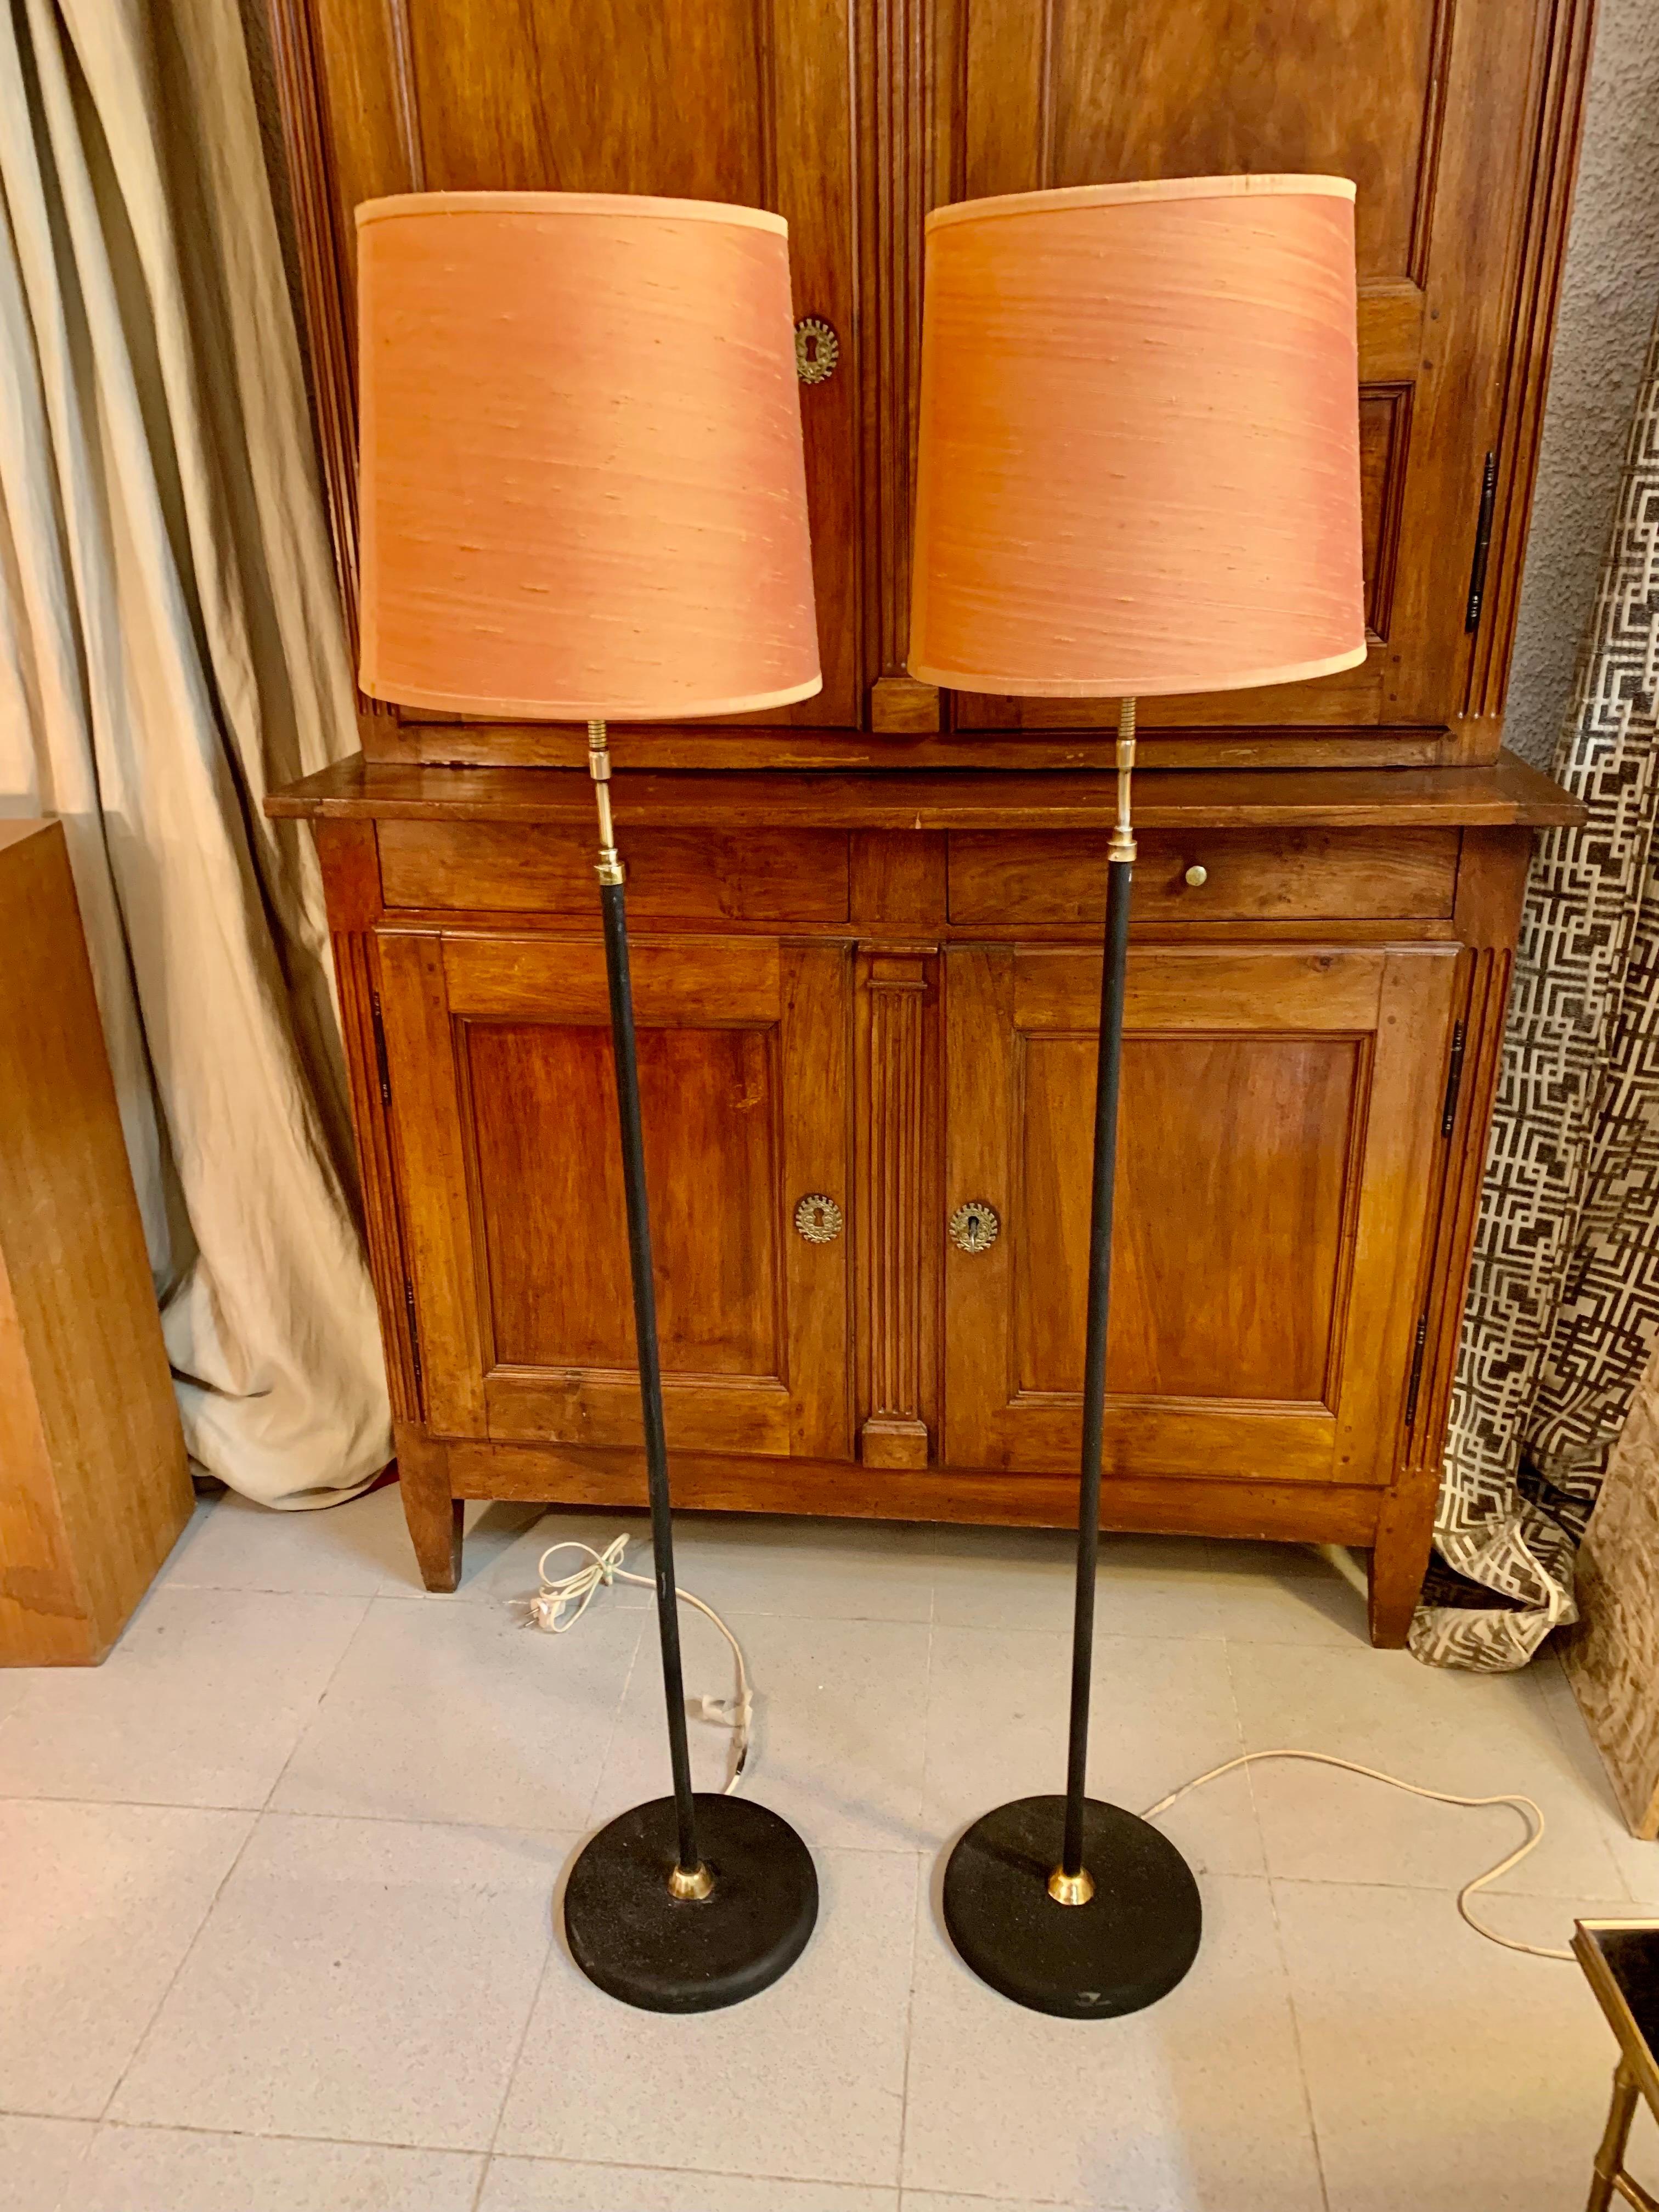 Set of two mid-century floor lamps was made in Sweden in the 1960s by Stilarmatur. The lamps consist of a black lacquered metal foot with a small brass cone, from where the black lacquered column begins. The lampshades rest on an adjustable brass